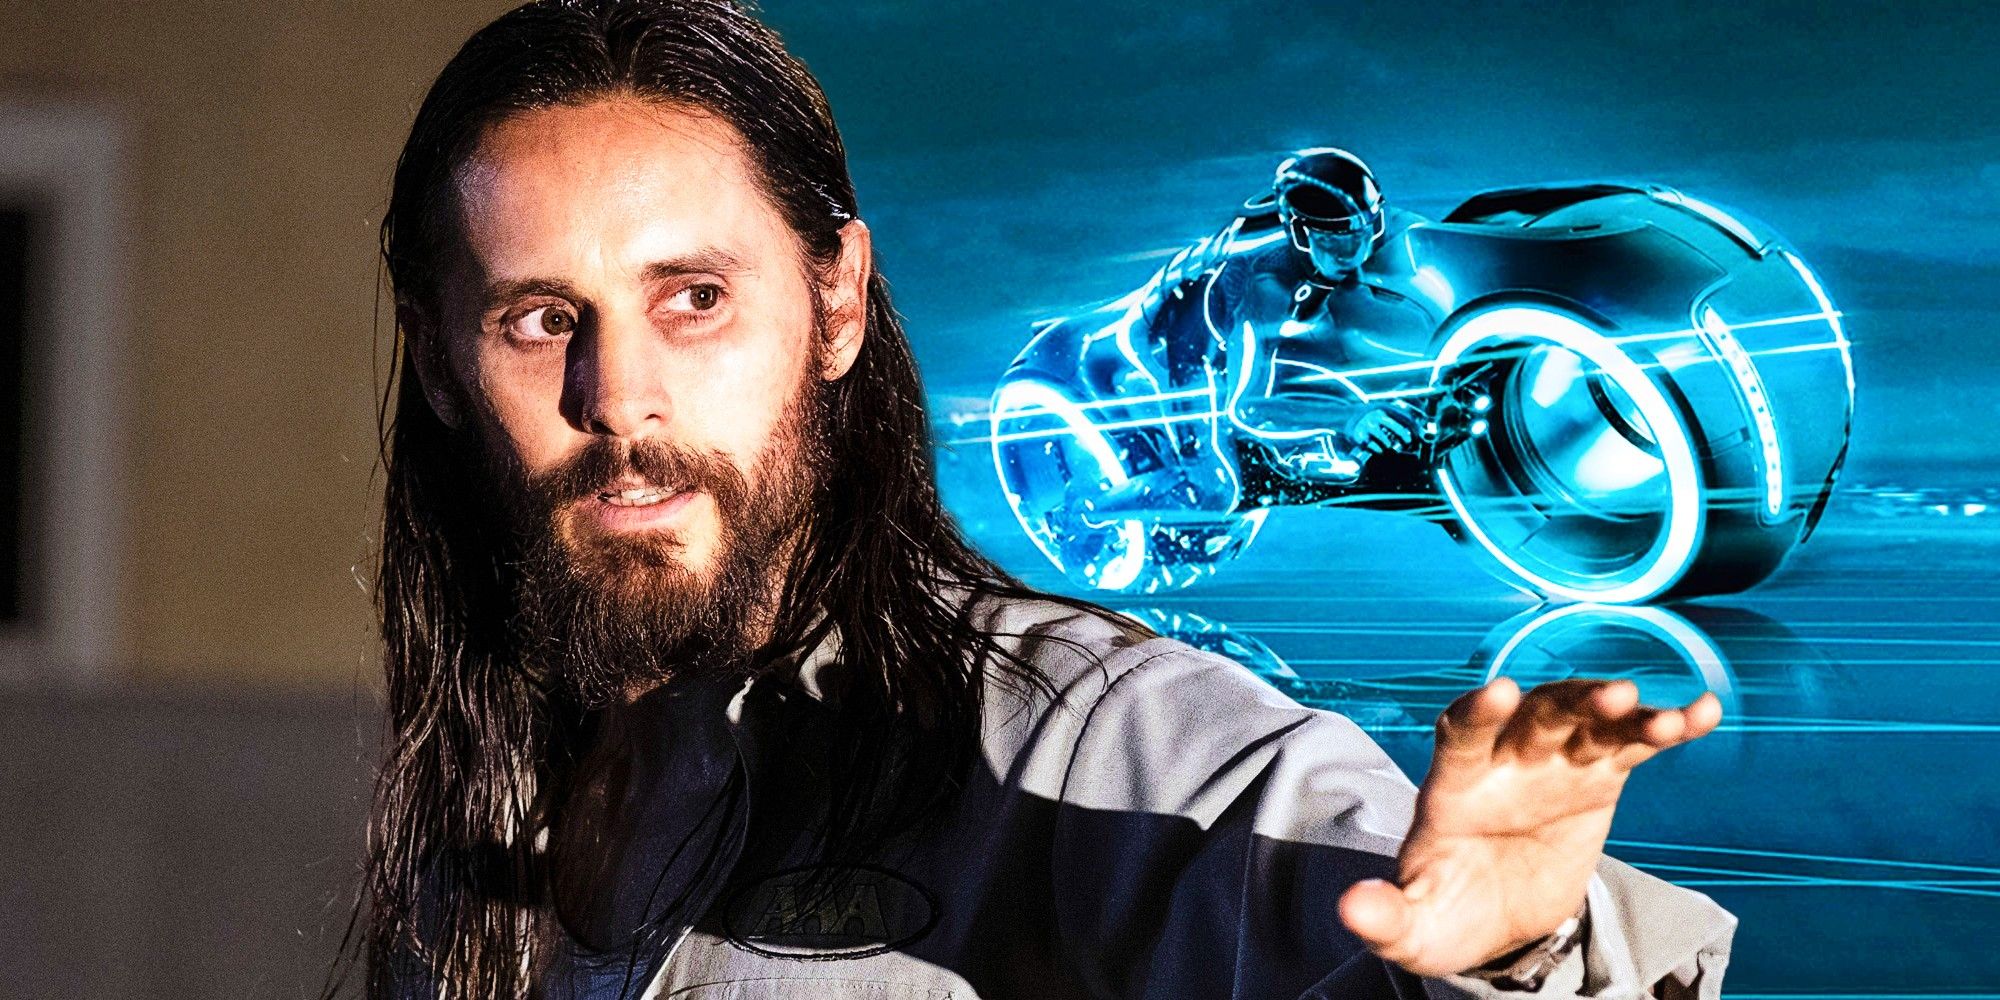 Custom image of Jared Leto in The Little Things and a character riding a bike in Tron Legacy